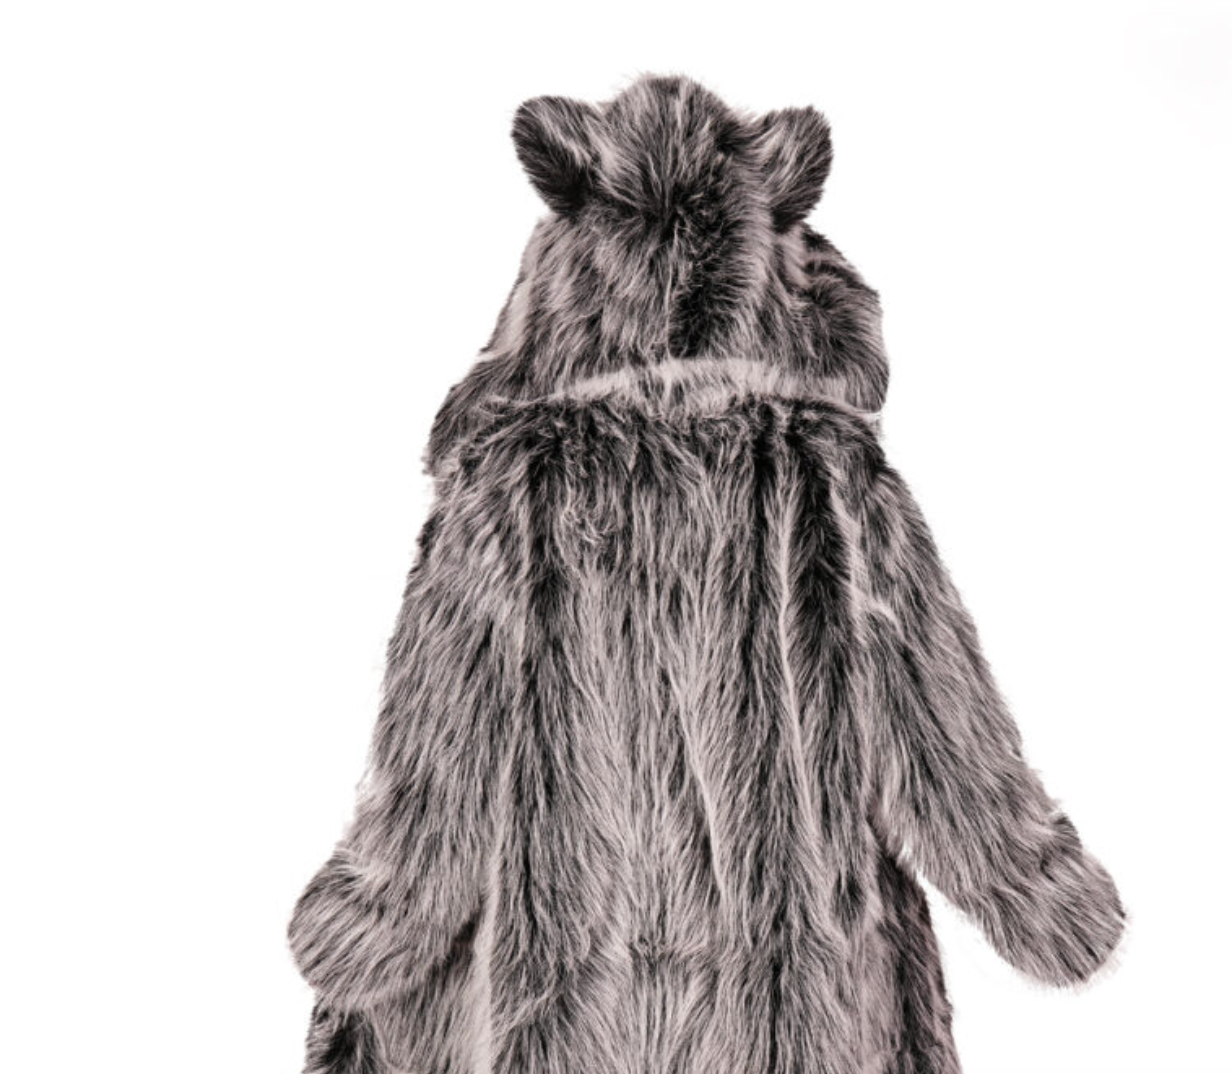 Hooded Faux Fur Coat with Ears